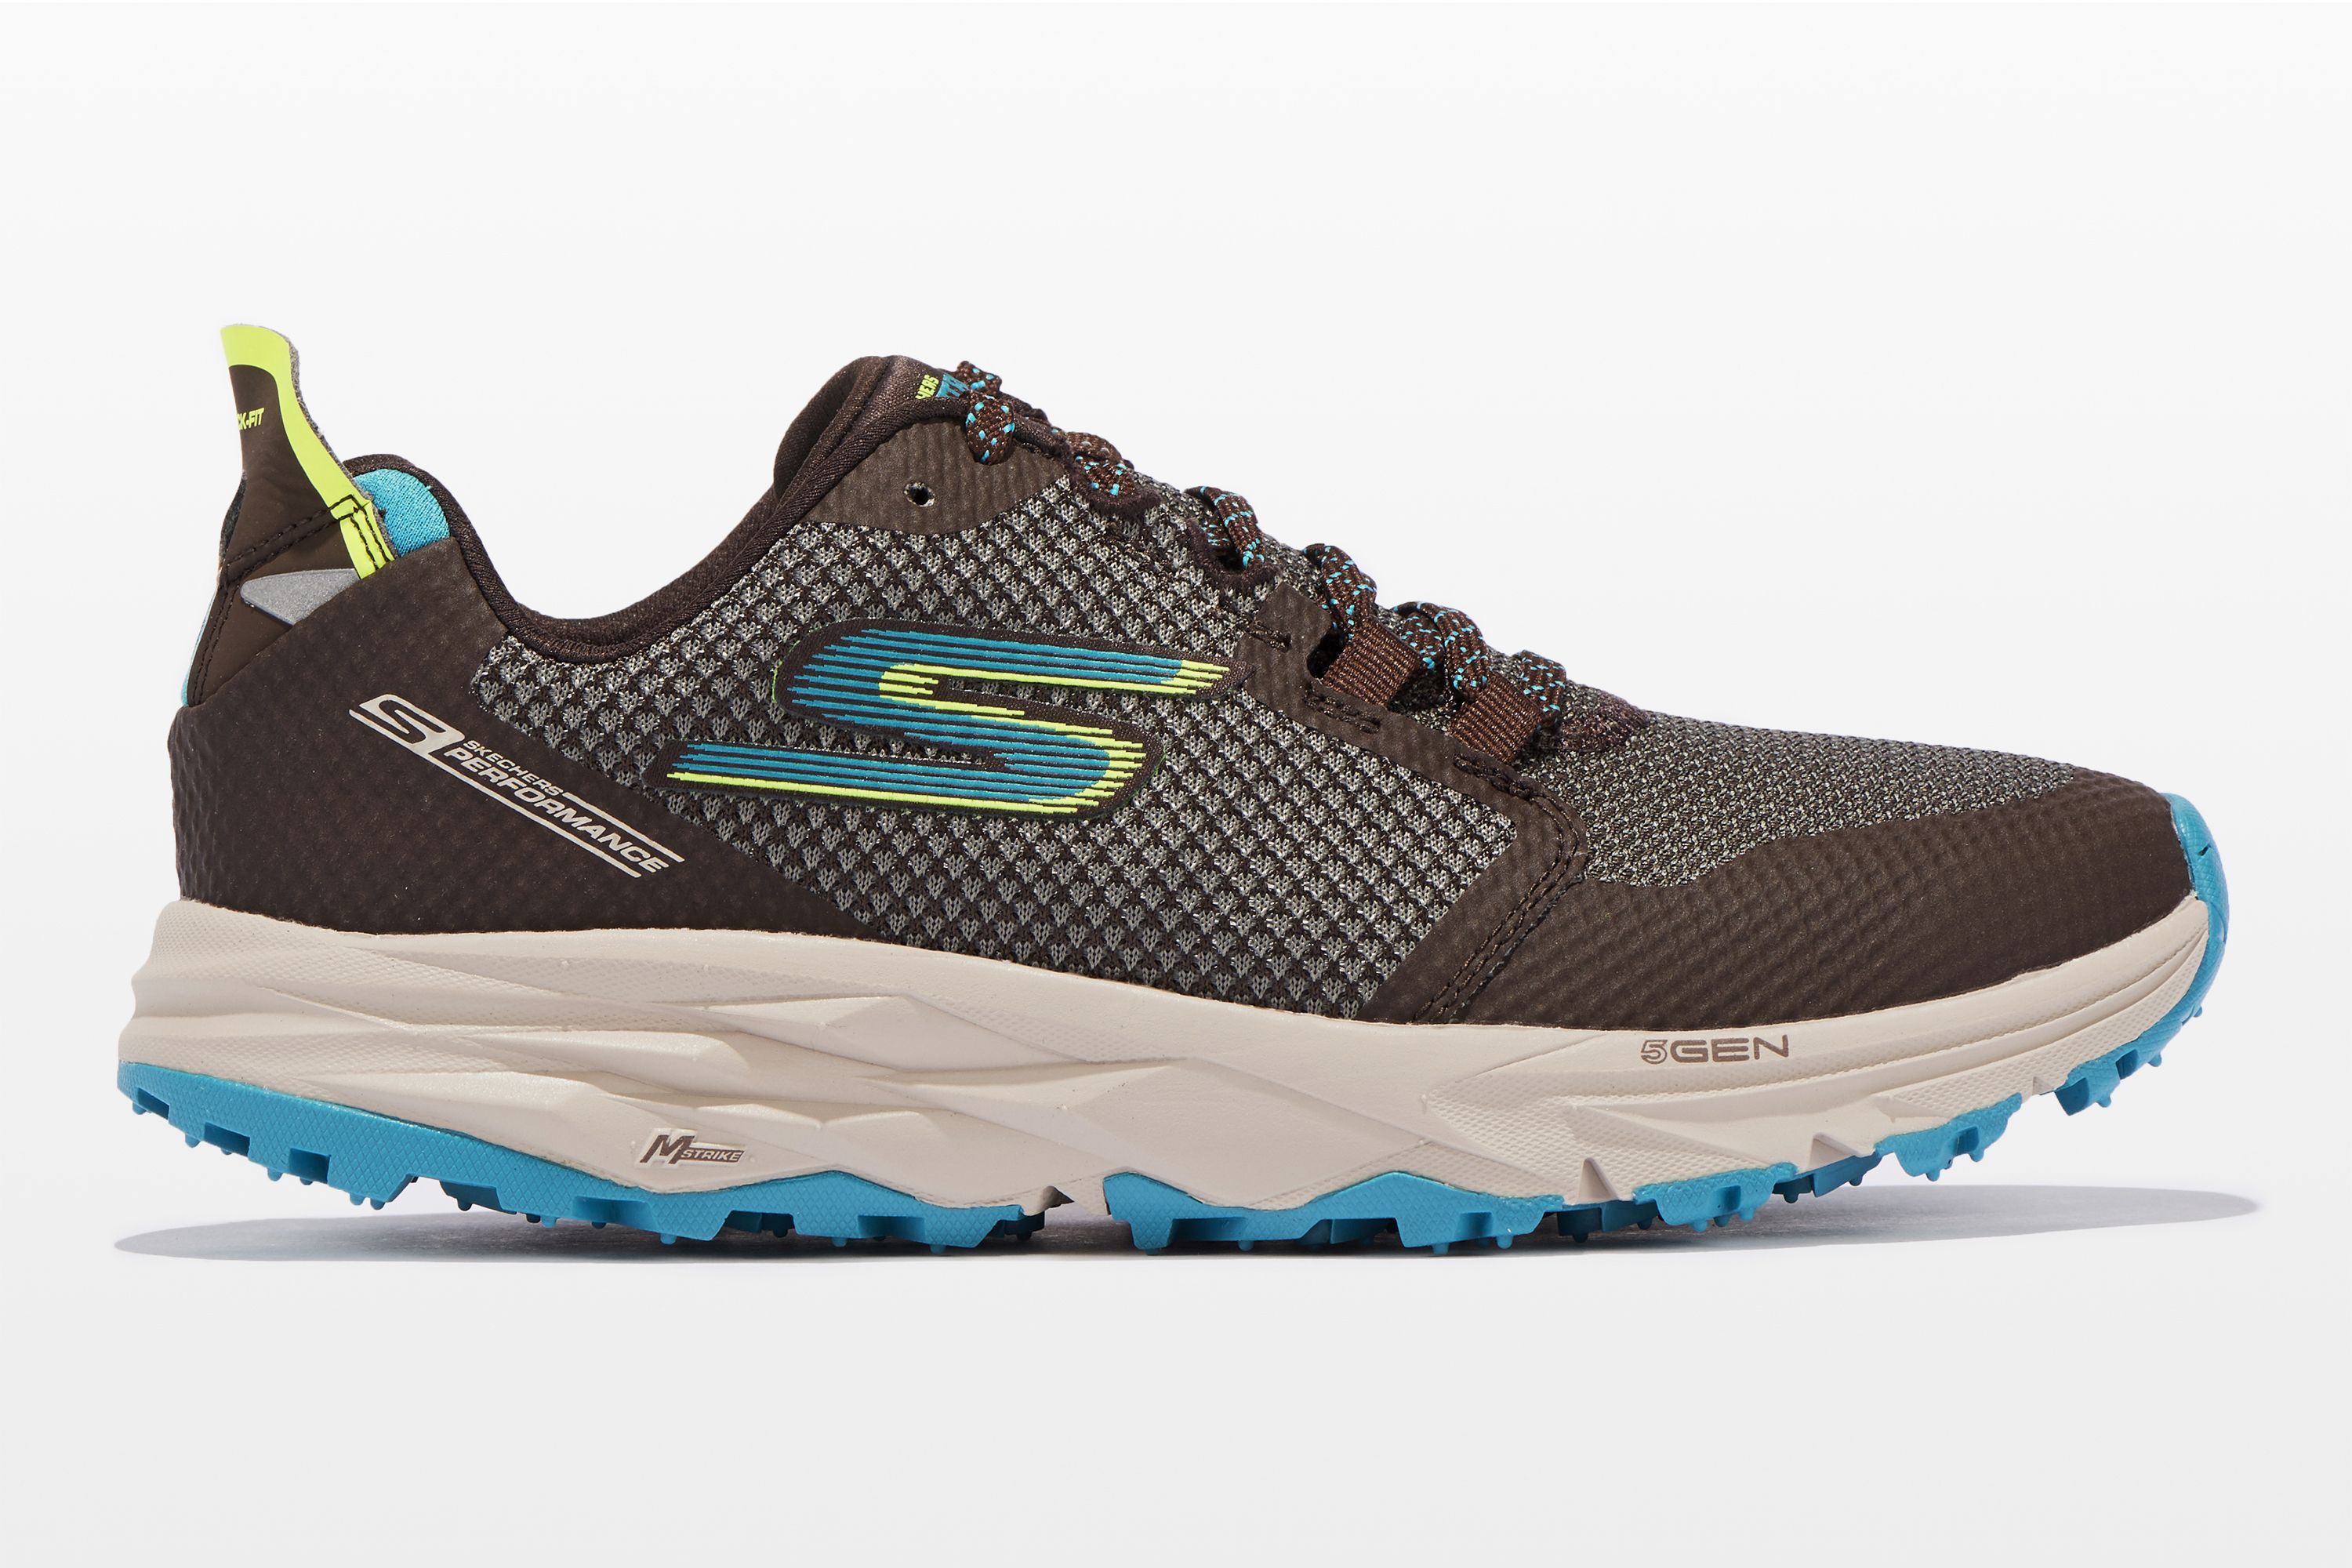 skechers go trail 2 review